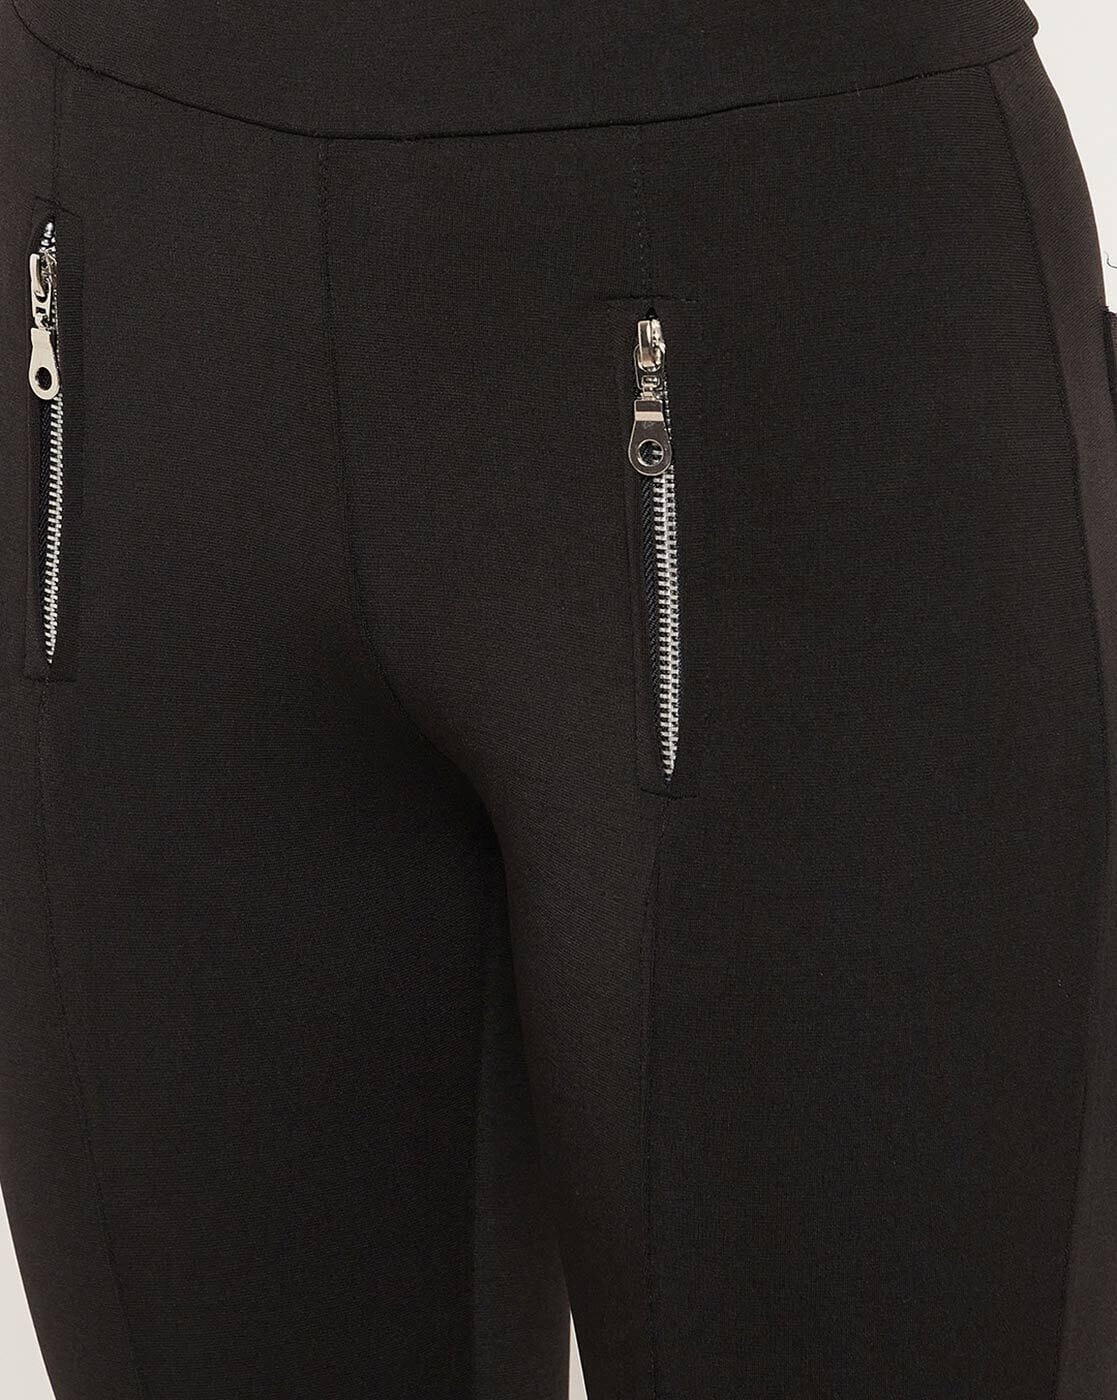 SAVE ₹1699 on Bitterlime Skinny Jeggings with Zip Pockets